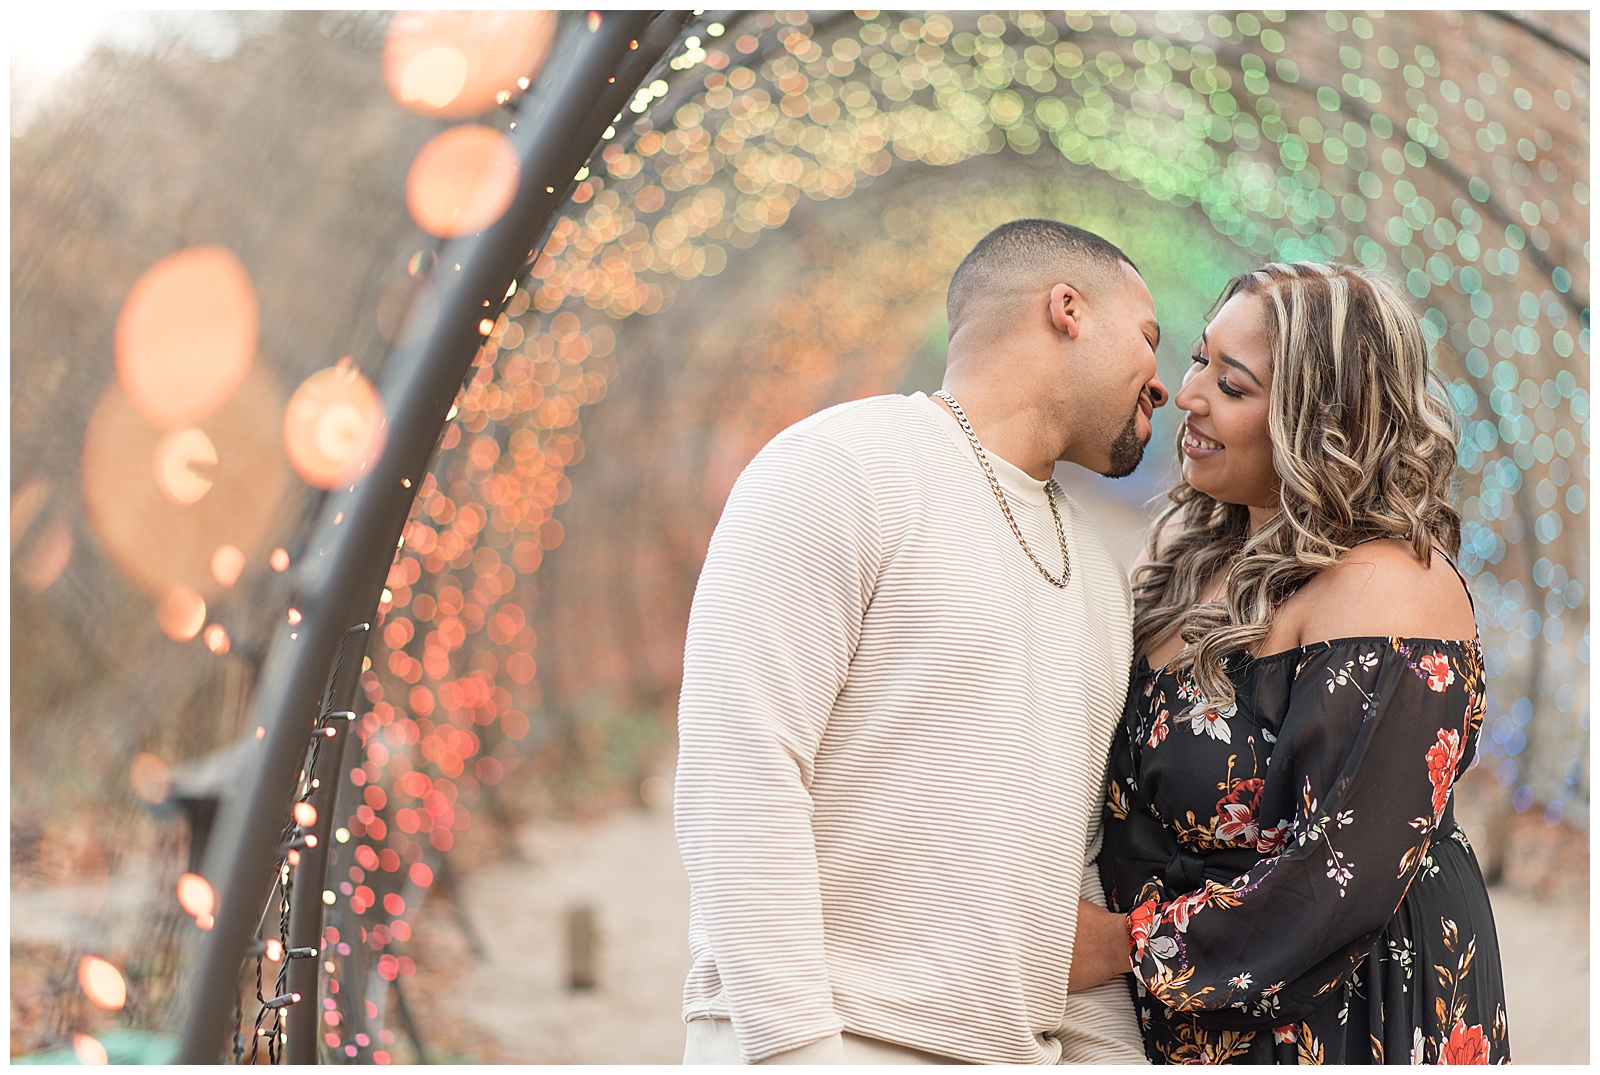 engaged couple smiling and almost kissing under archway filled with colorful lights at longwood gardens